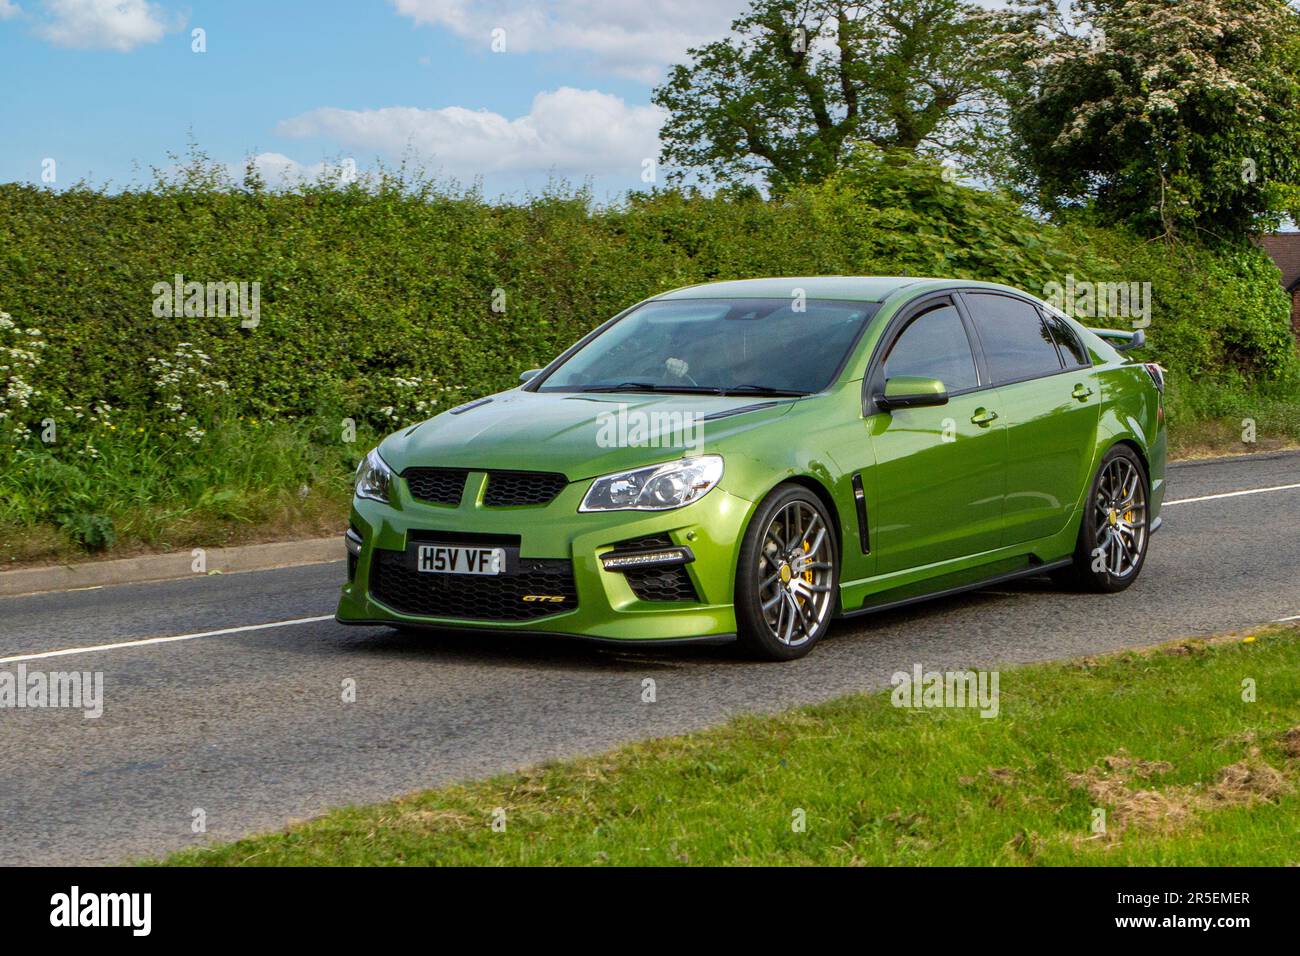 2015 Vauxhall Vxr8 Gts V8 Petrol saloon 6162 cc car, Yesteryear motors en route to Capesthorne Hall Vintage Collectors car show, Cheshire, UK 2023 Stock Photo